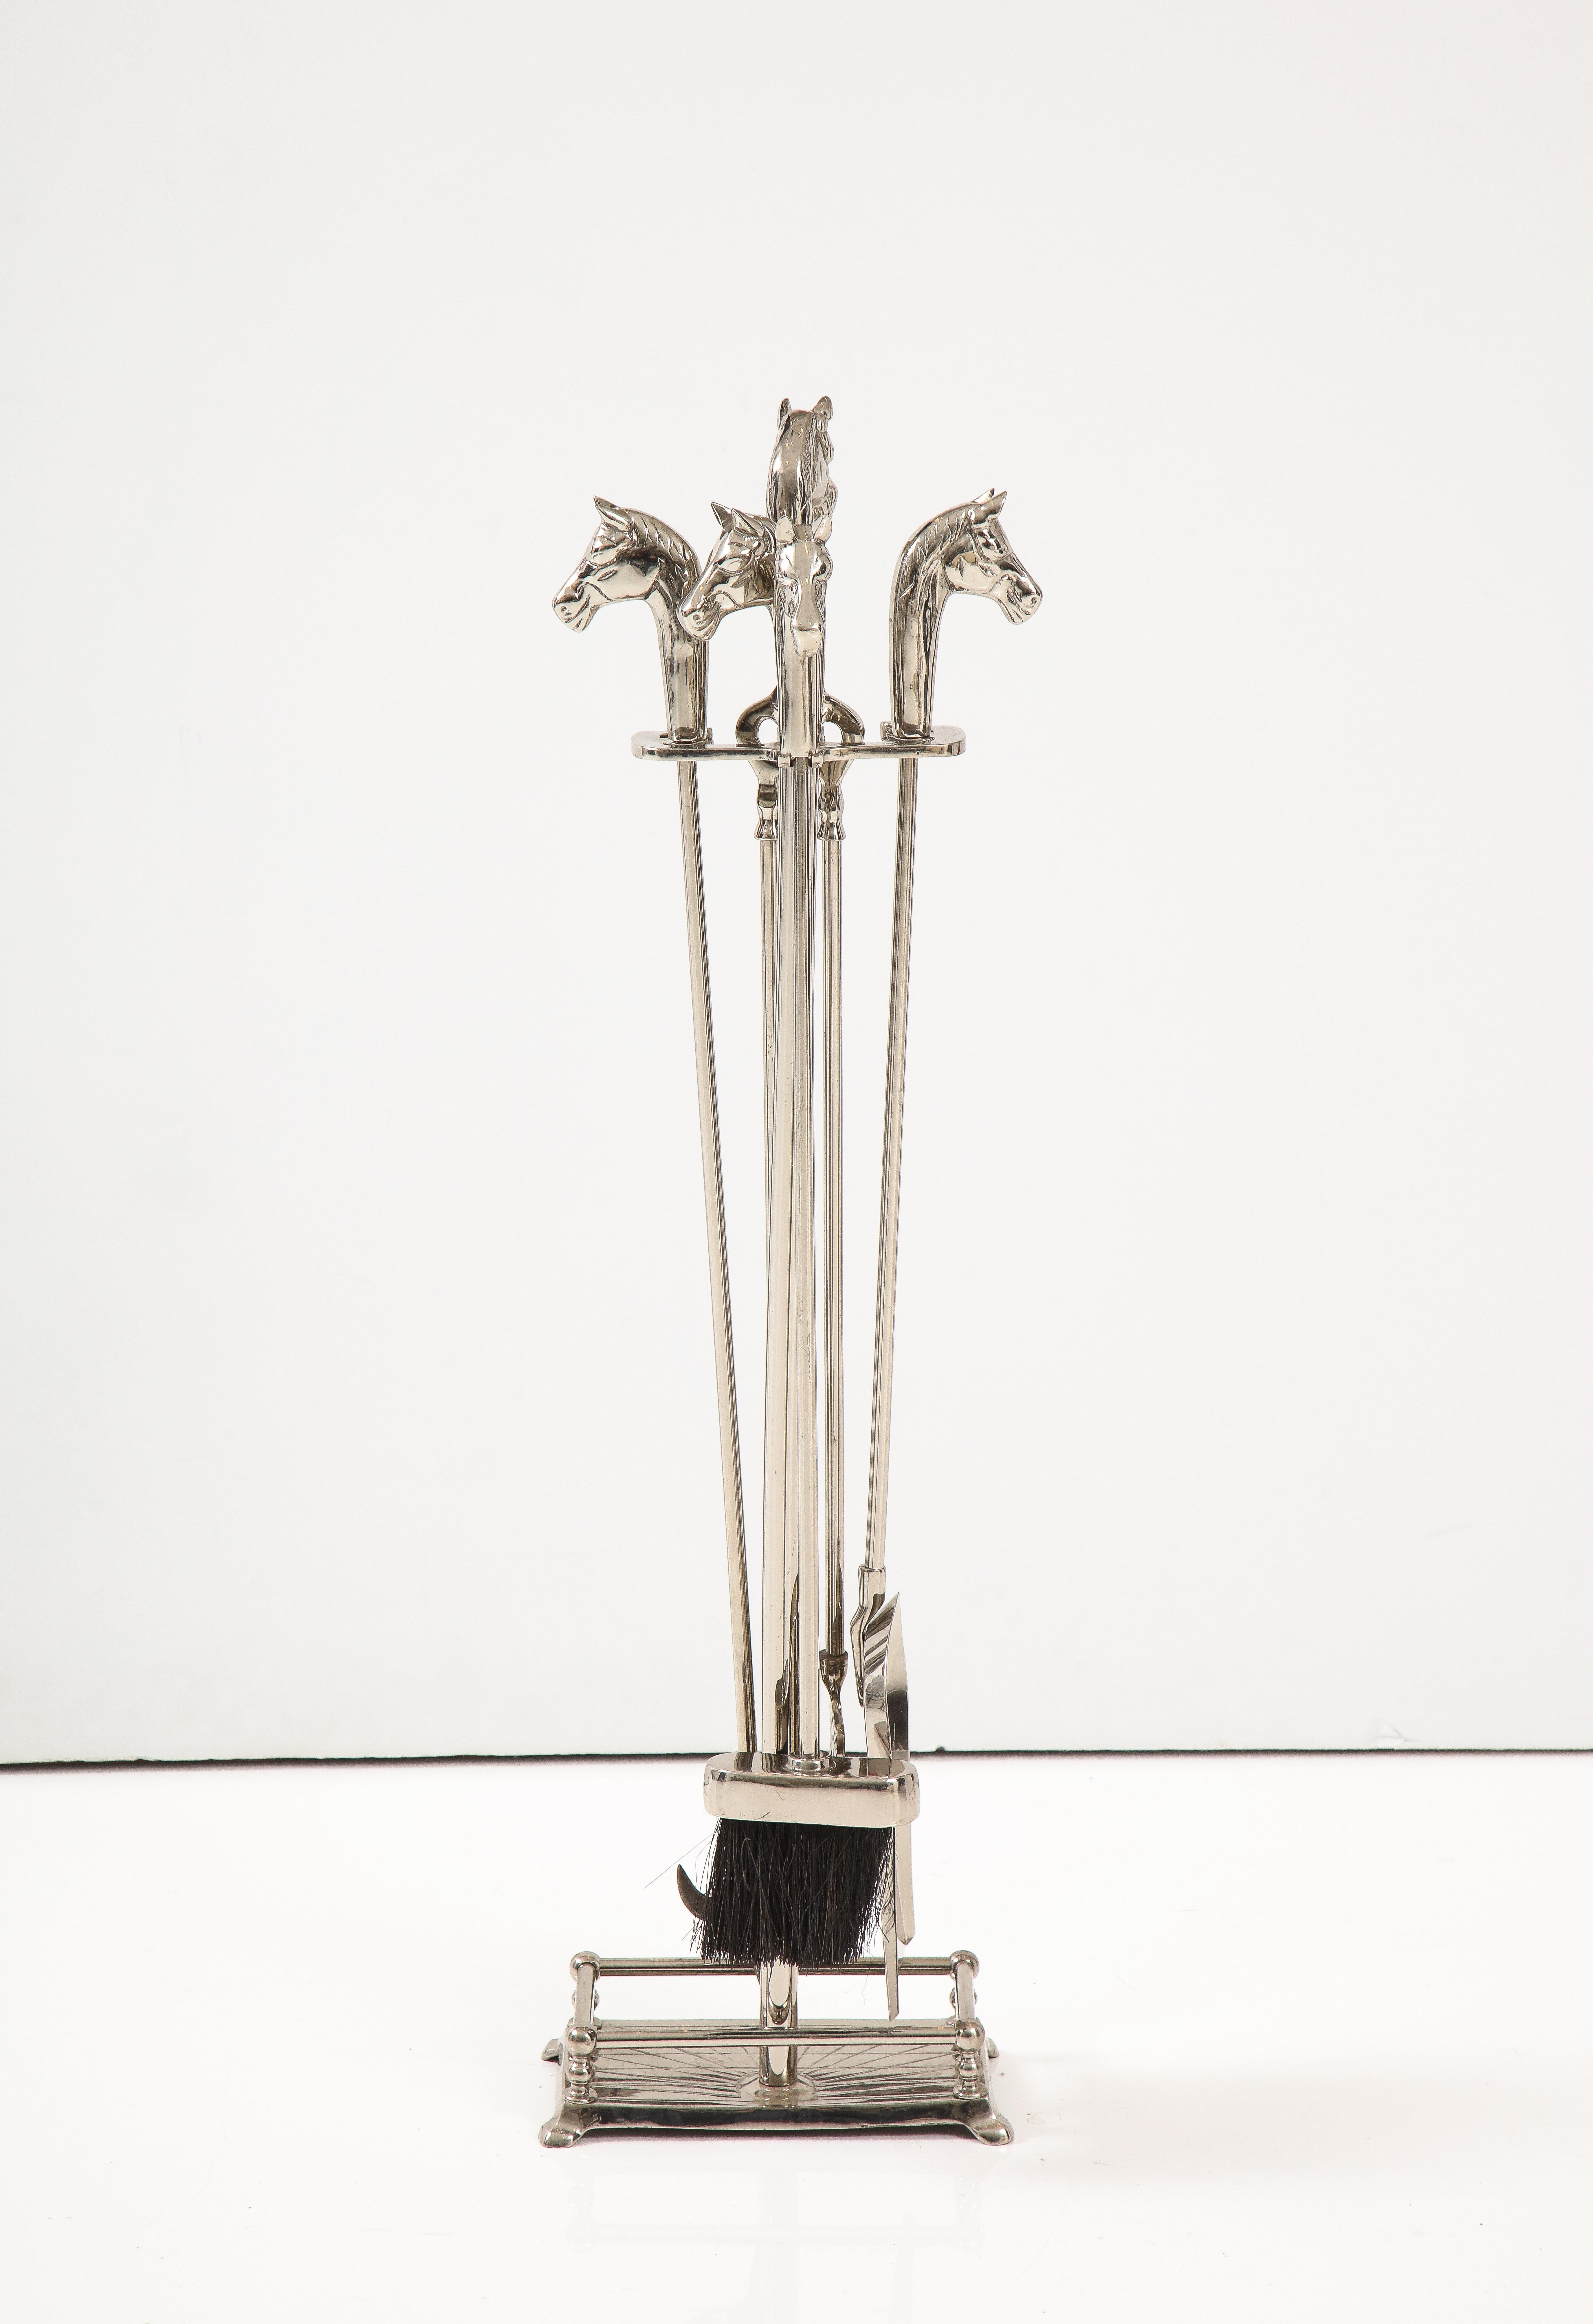 Set of polished nickel Art Deco fireplace tools with horse head handles. Set includes stand, poker, shovel, tongs and brush.